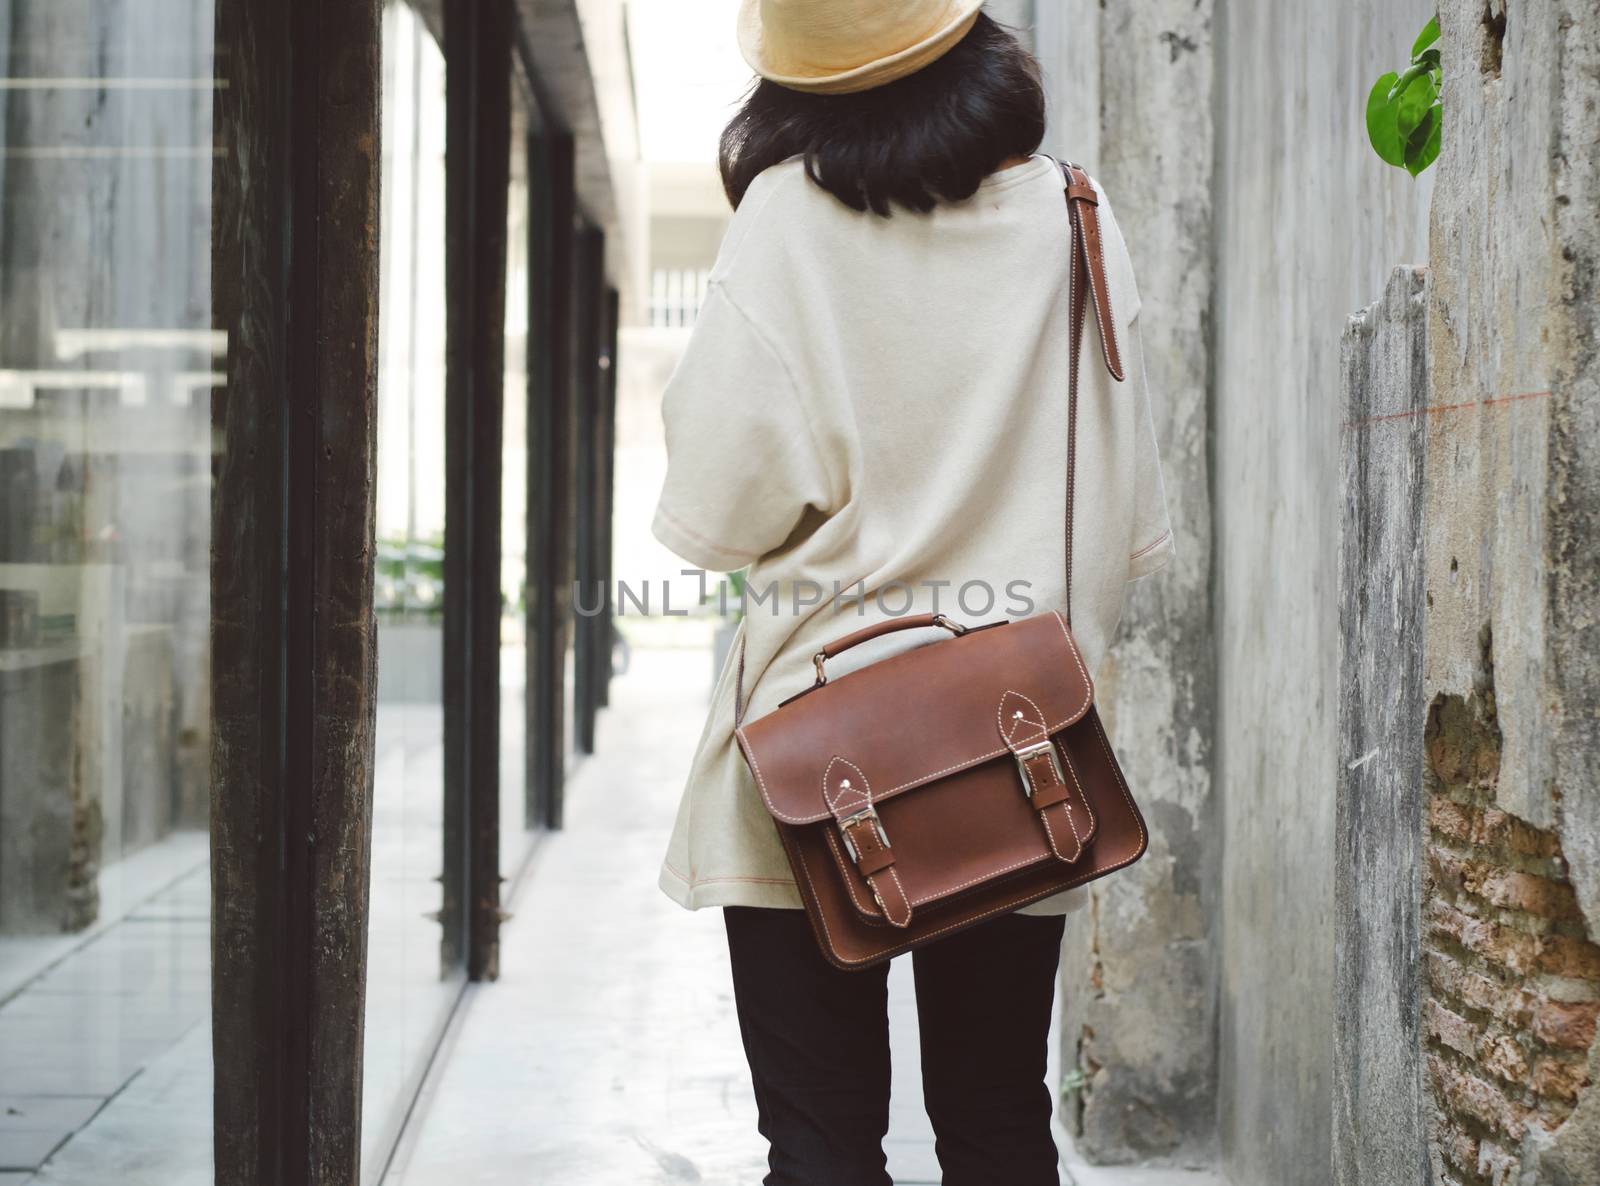 Fashion girl with leather bag at concrete alleyway by siraanamwong